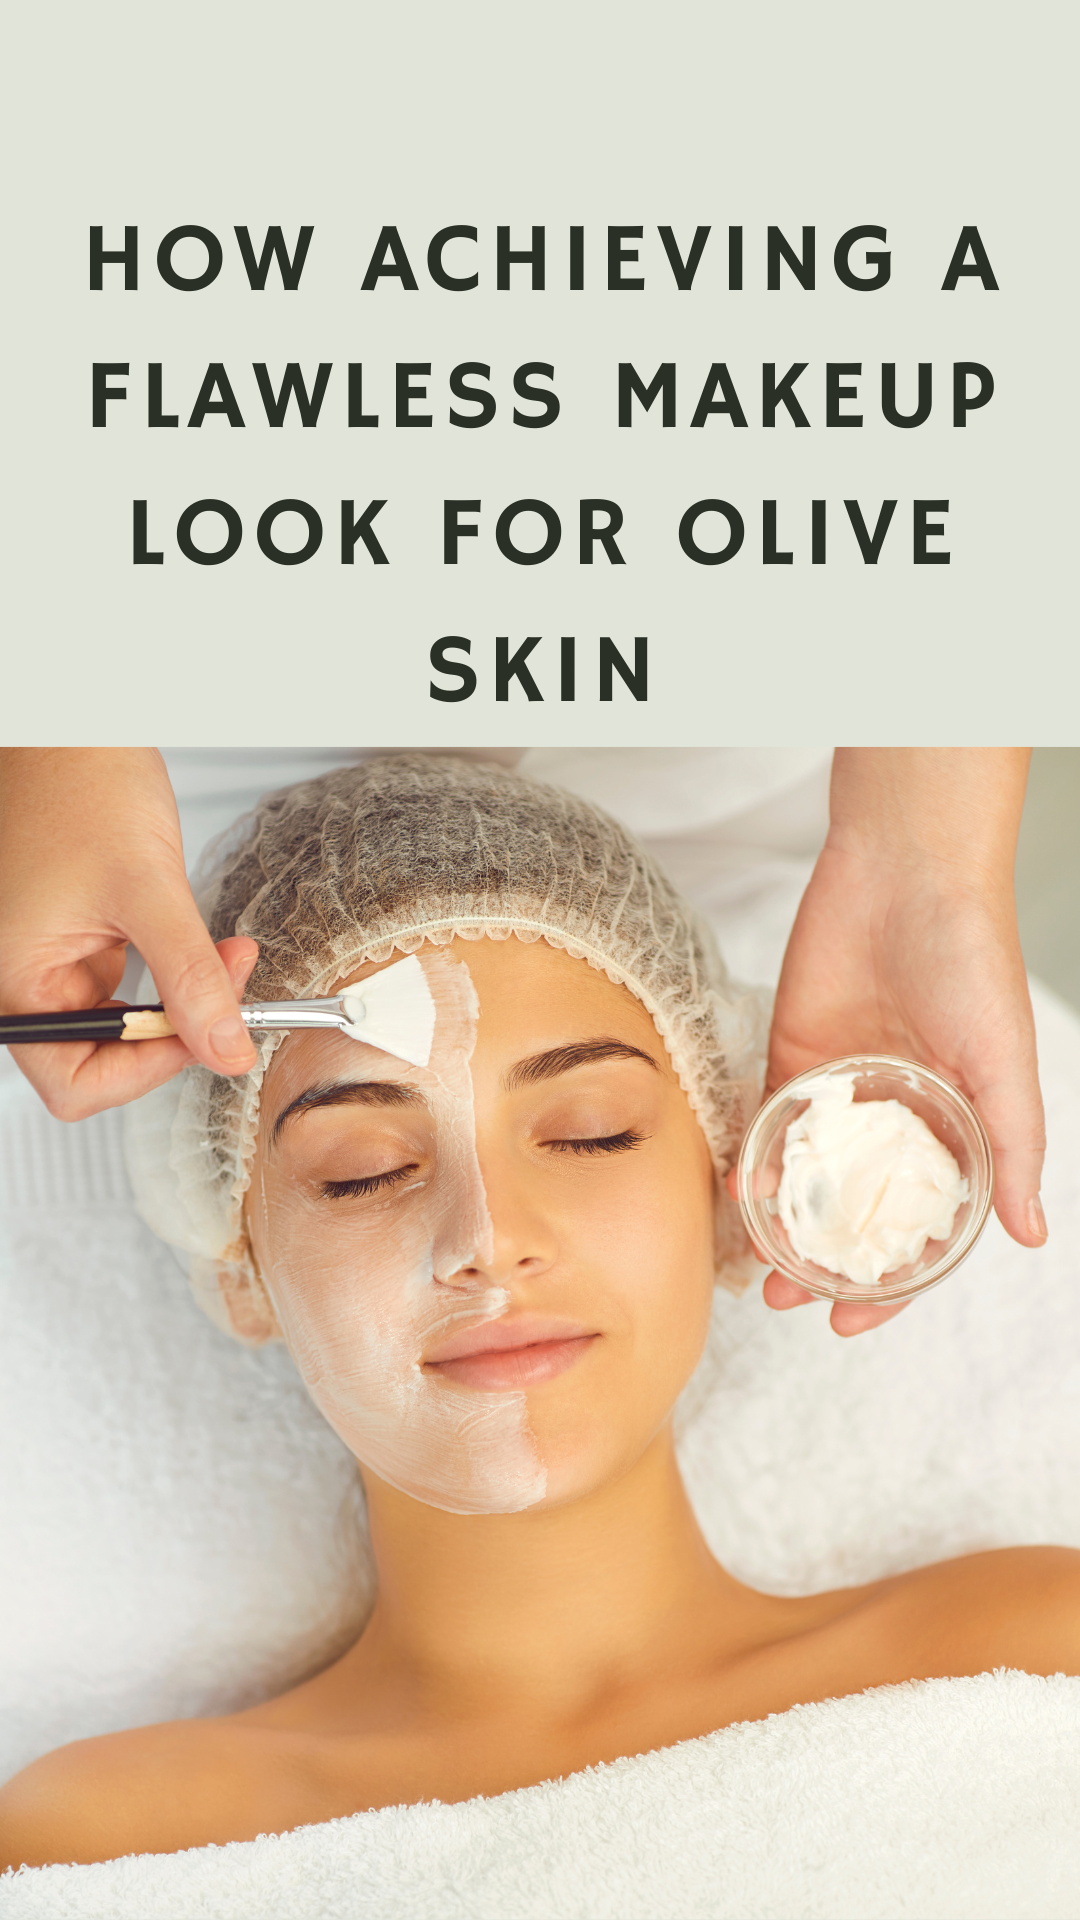 _Styling Tips for Enhancing Your Olive Skin Tone